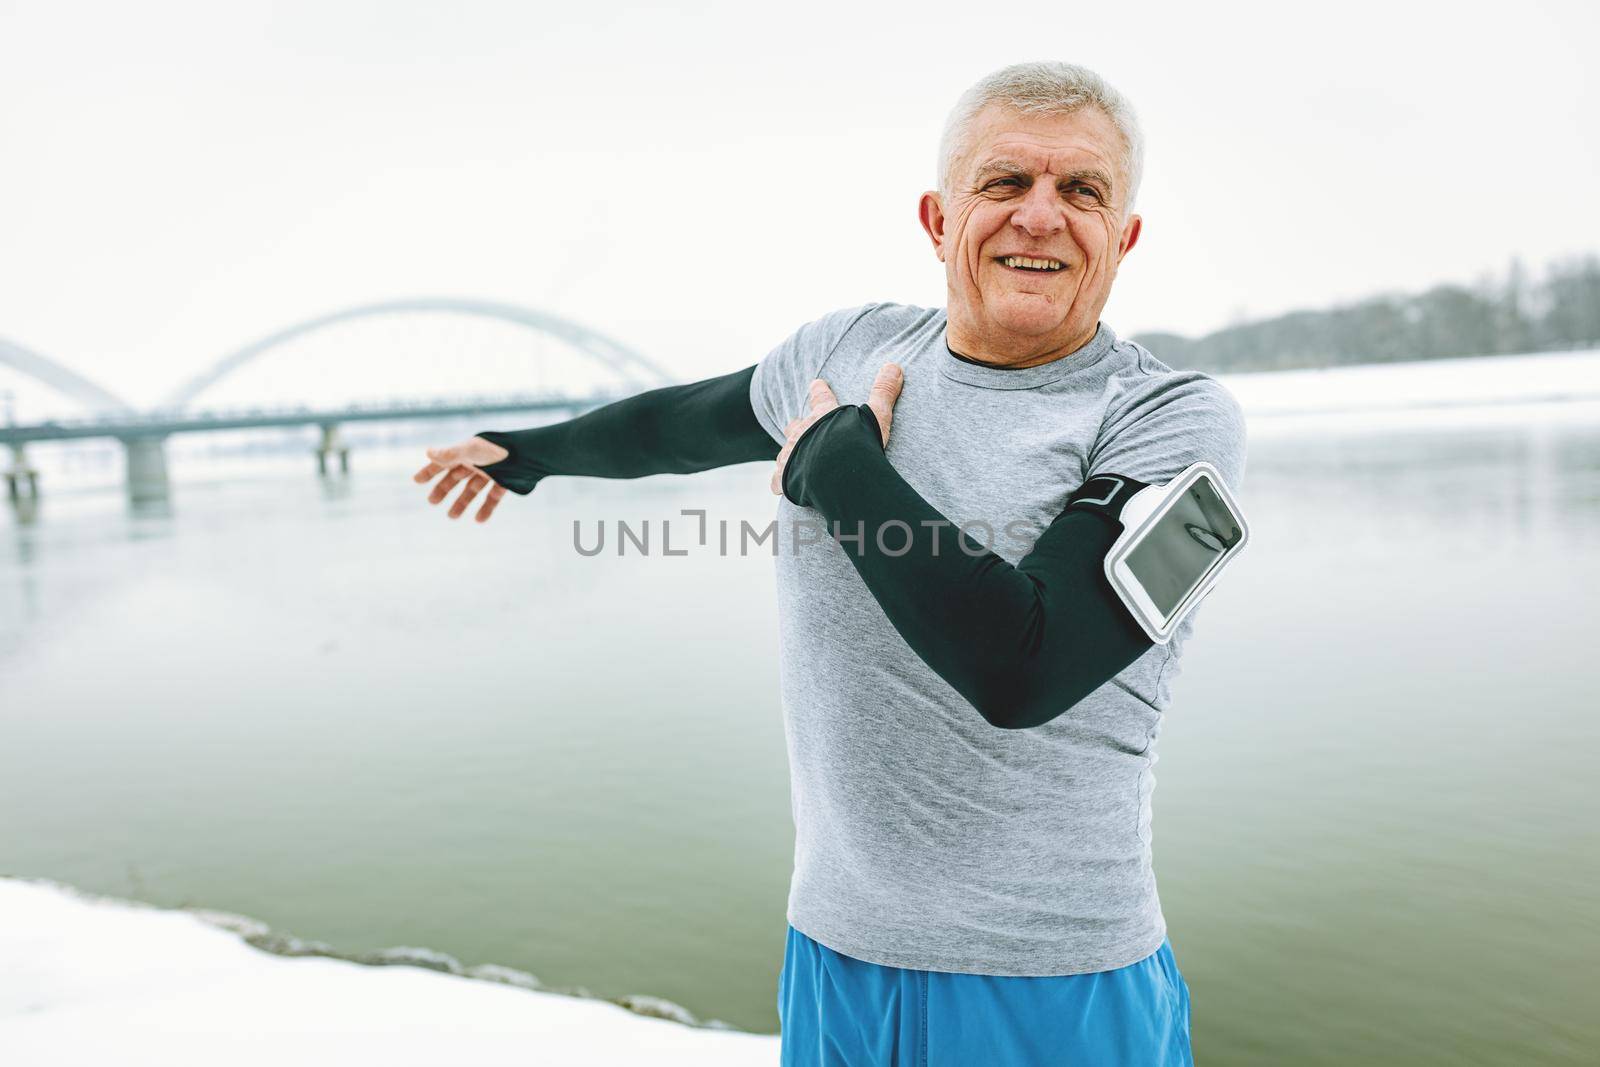 Active senior man stretching and doing exercises by the river during the winter training outside in.